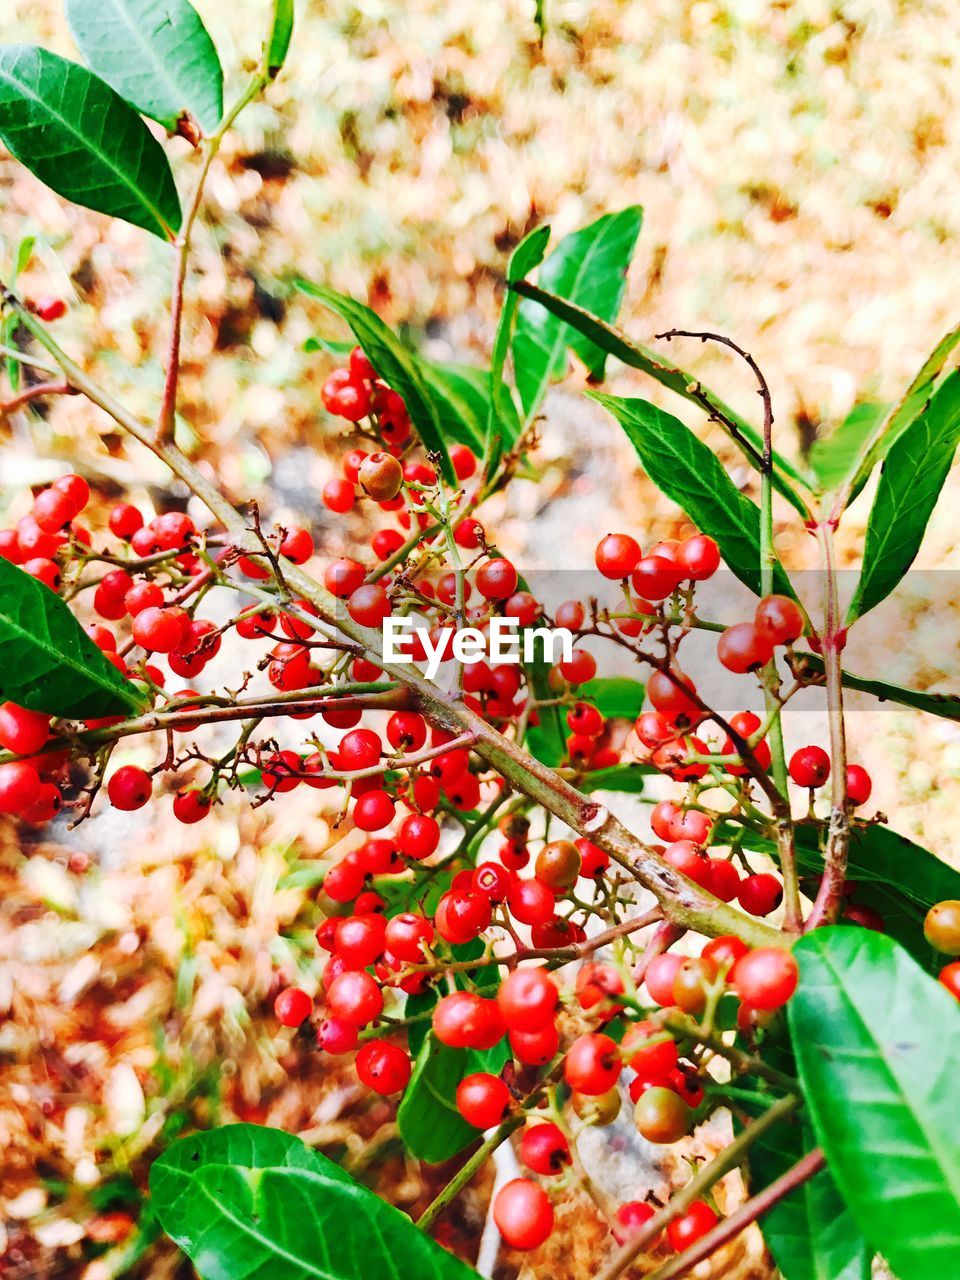 CLOSE-UP OF BERRIES GROWING ON TREE